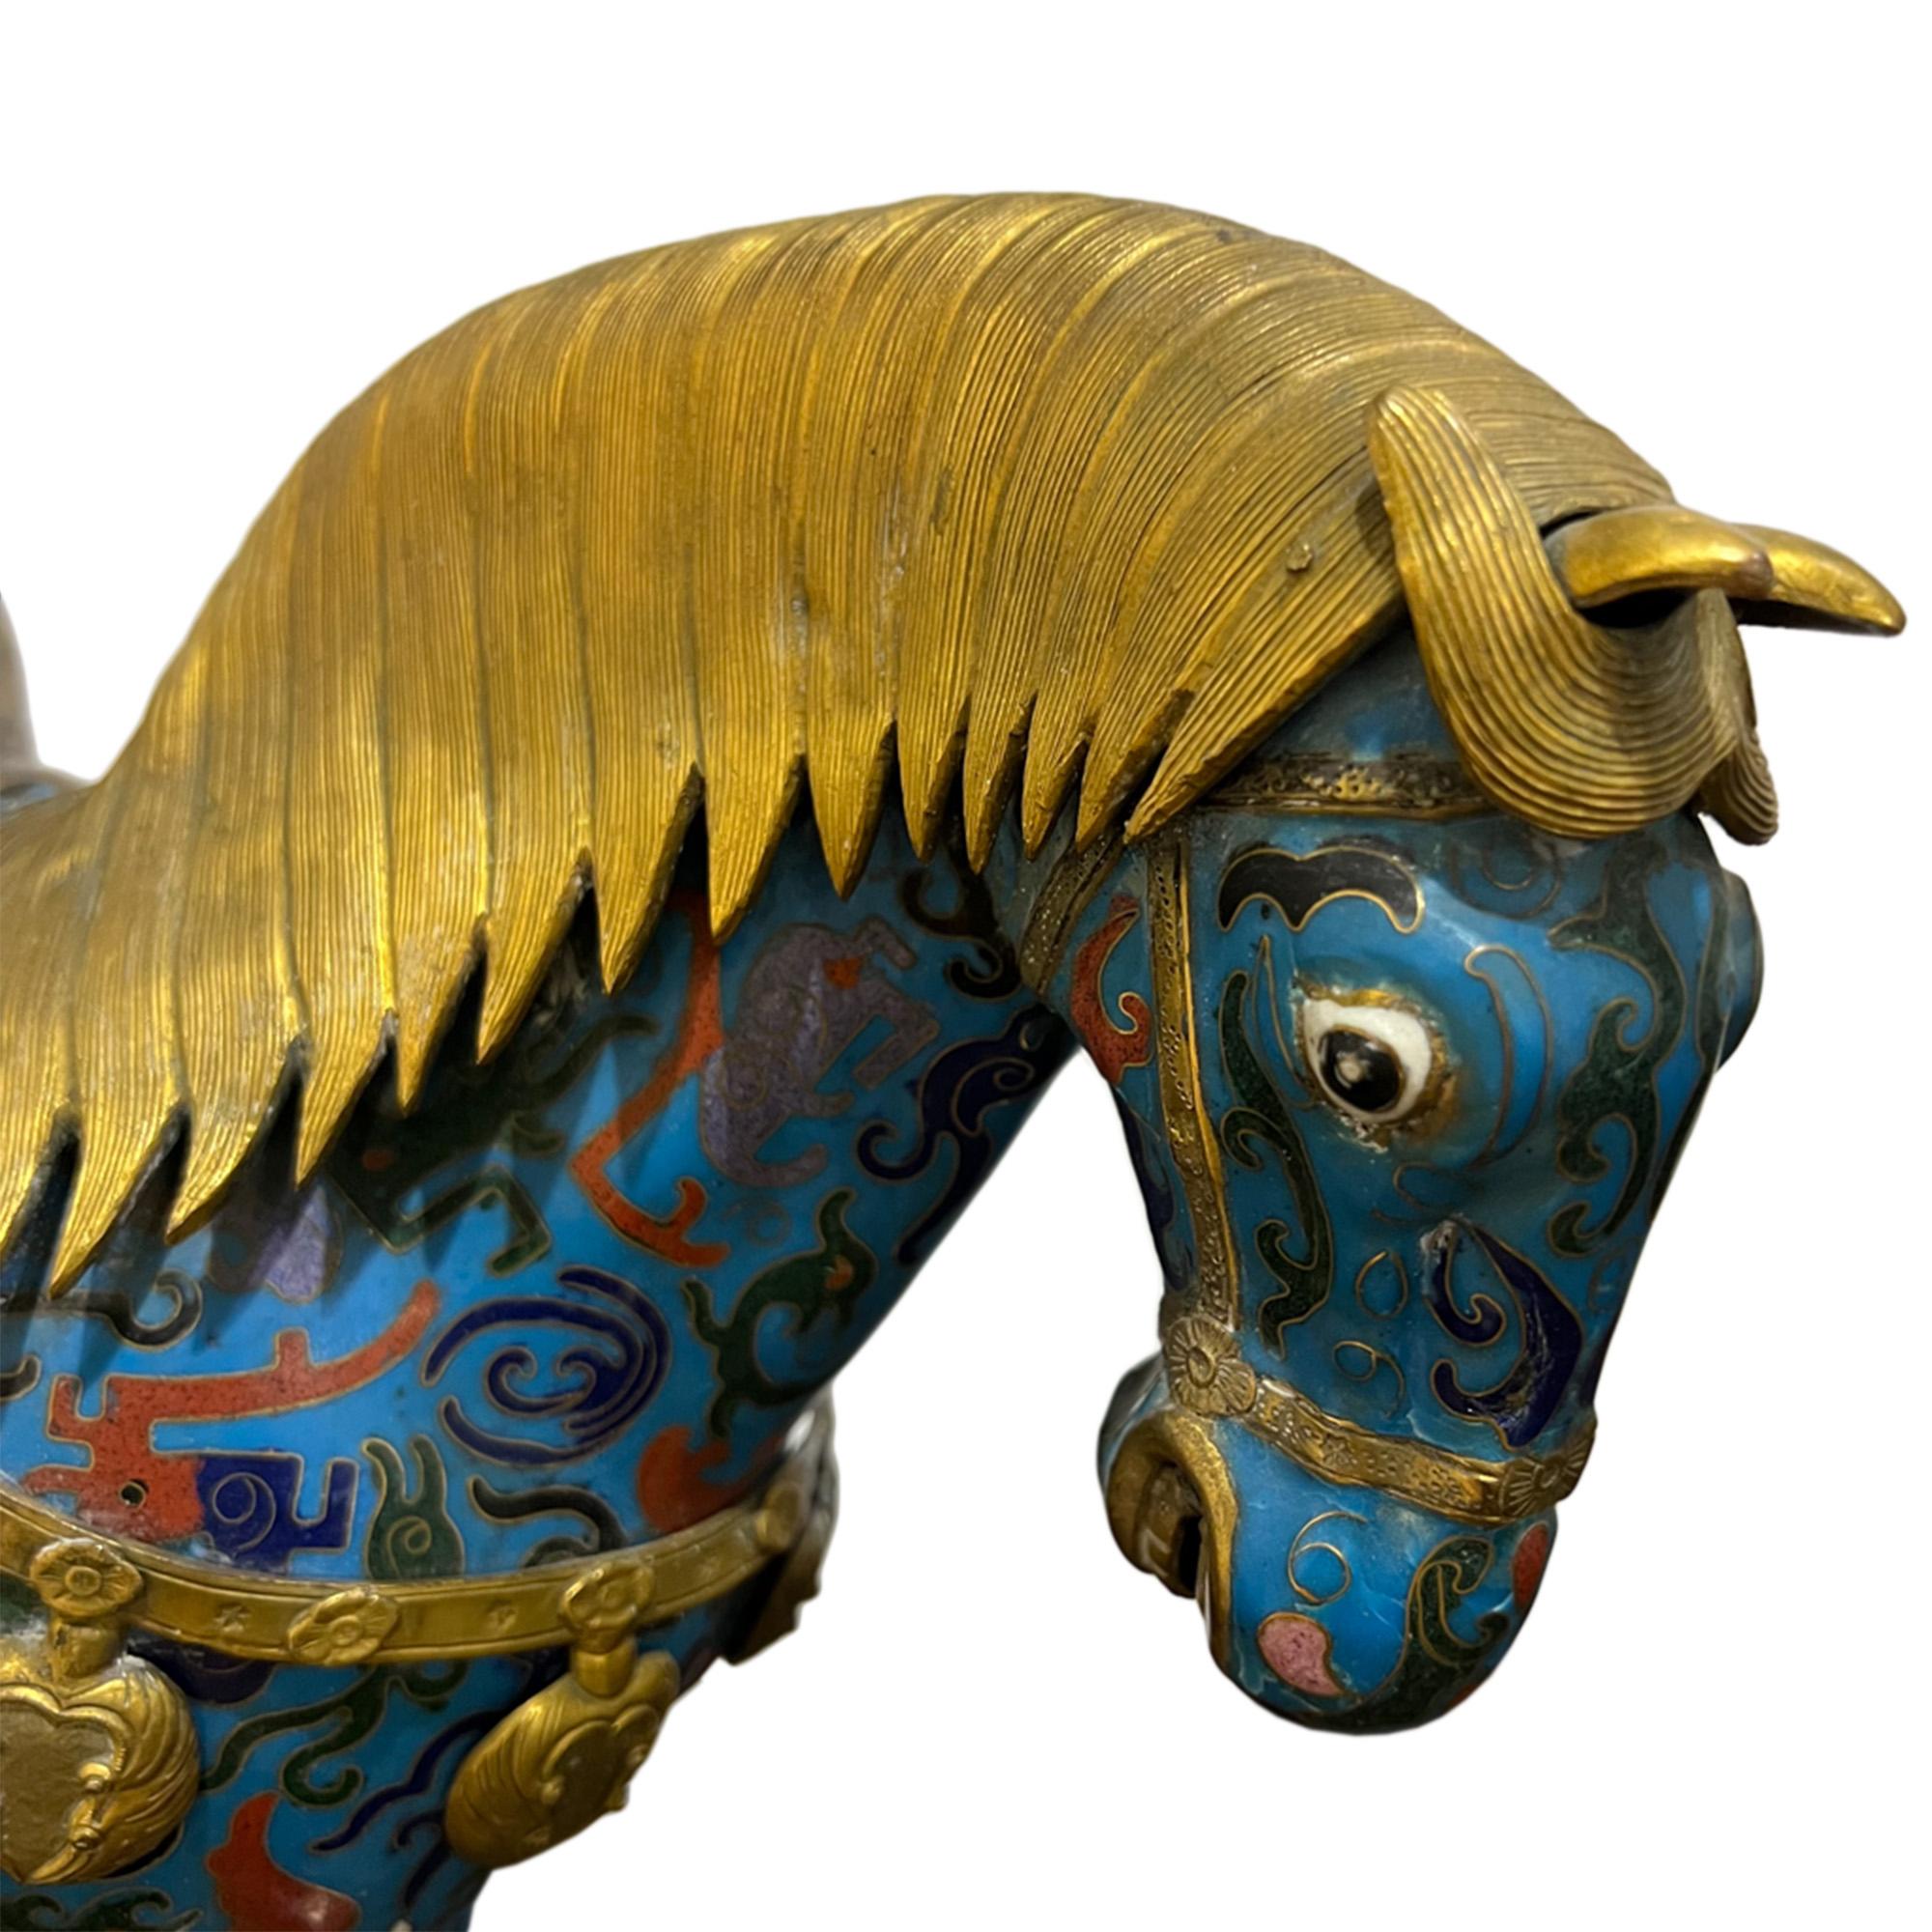 A fantastic pair of enamel, gilt and copper horses. Take a look at all our pictures to see the intricate detail and life like expressions - amazing colours too. 

Made in China in the mid 20th century.

Superb decorative objects!